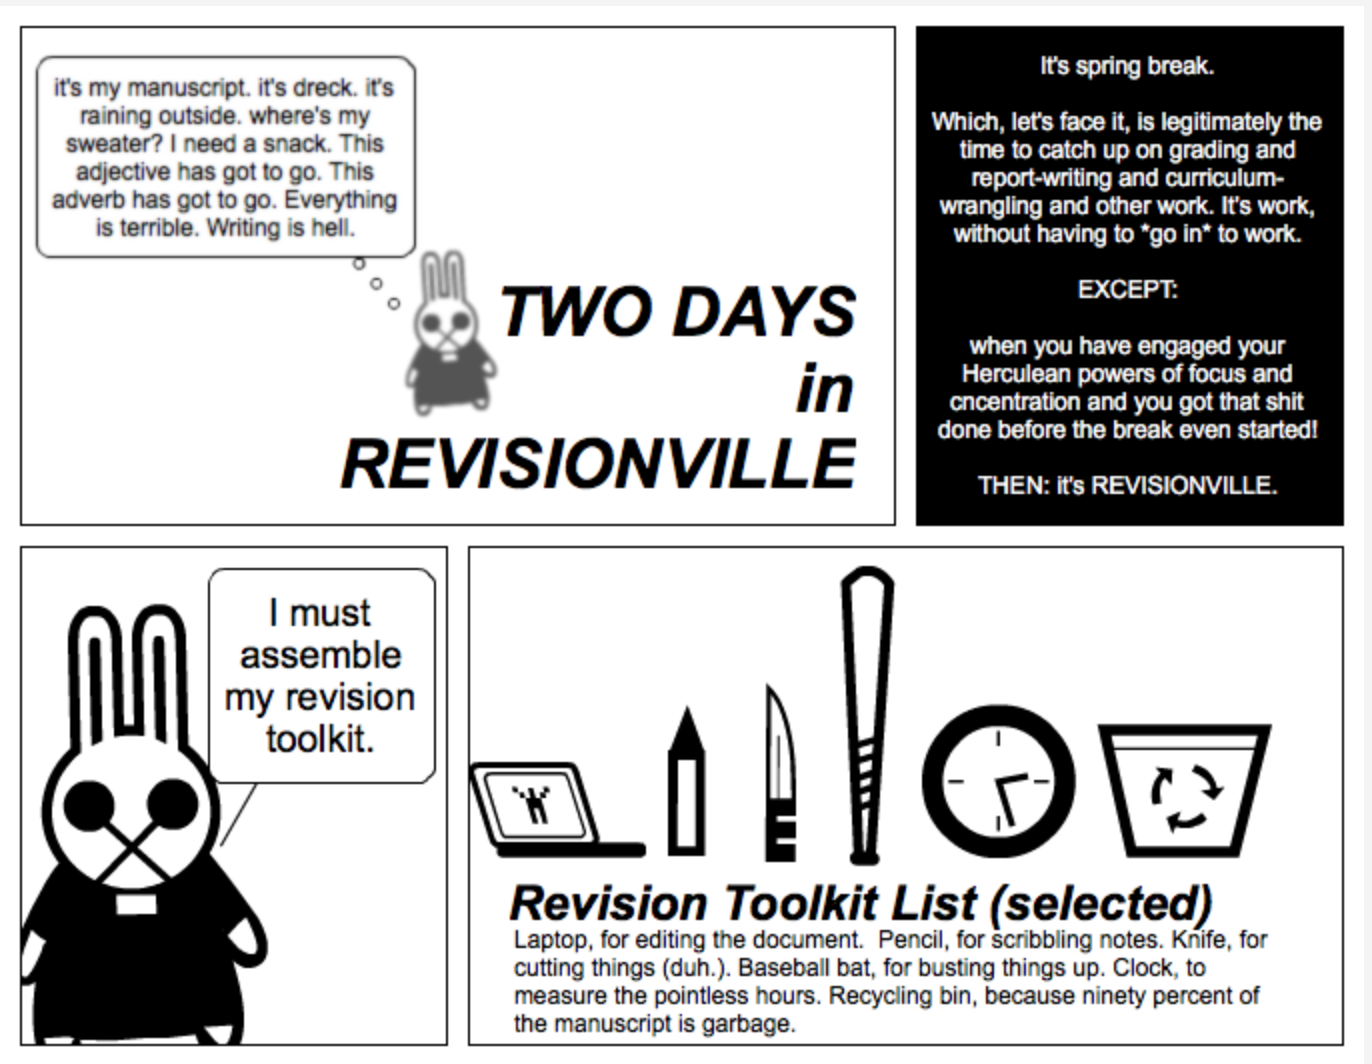 A comic on the promises and perils of living in . . . REVISIONVILLE